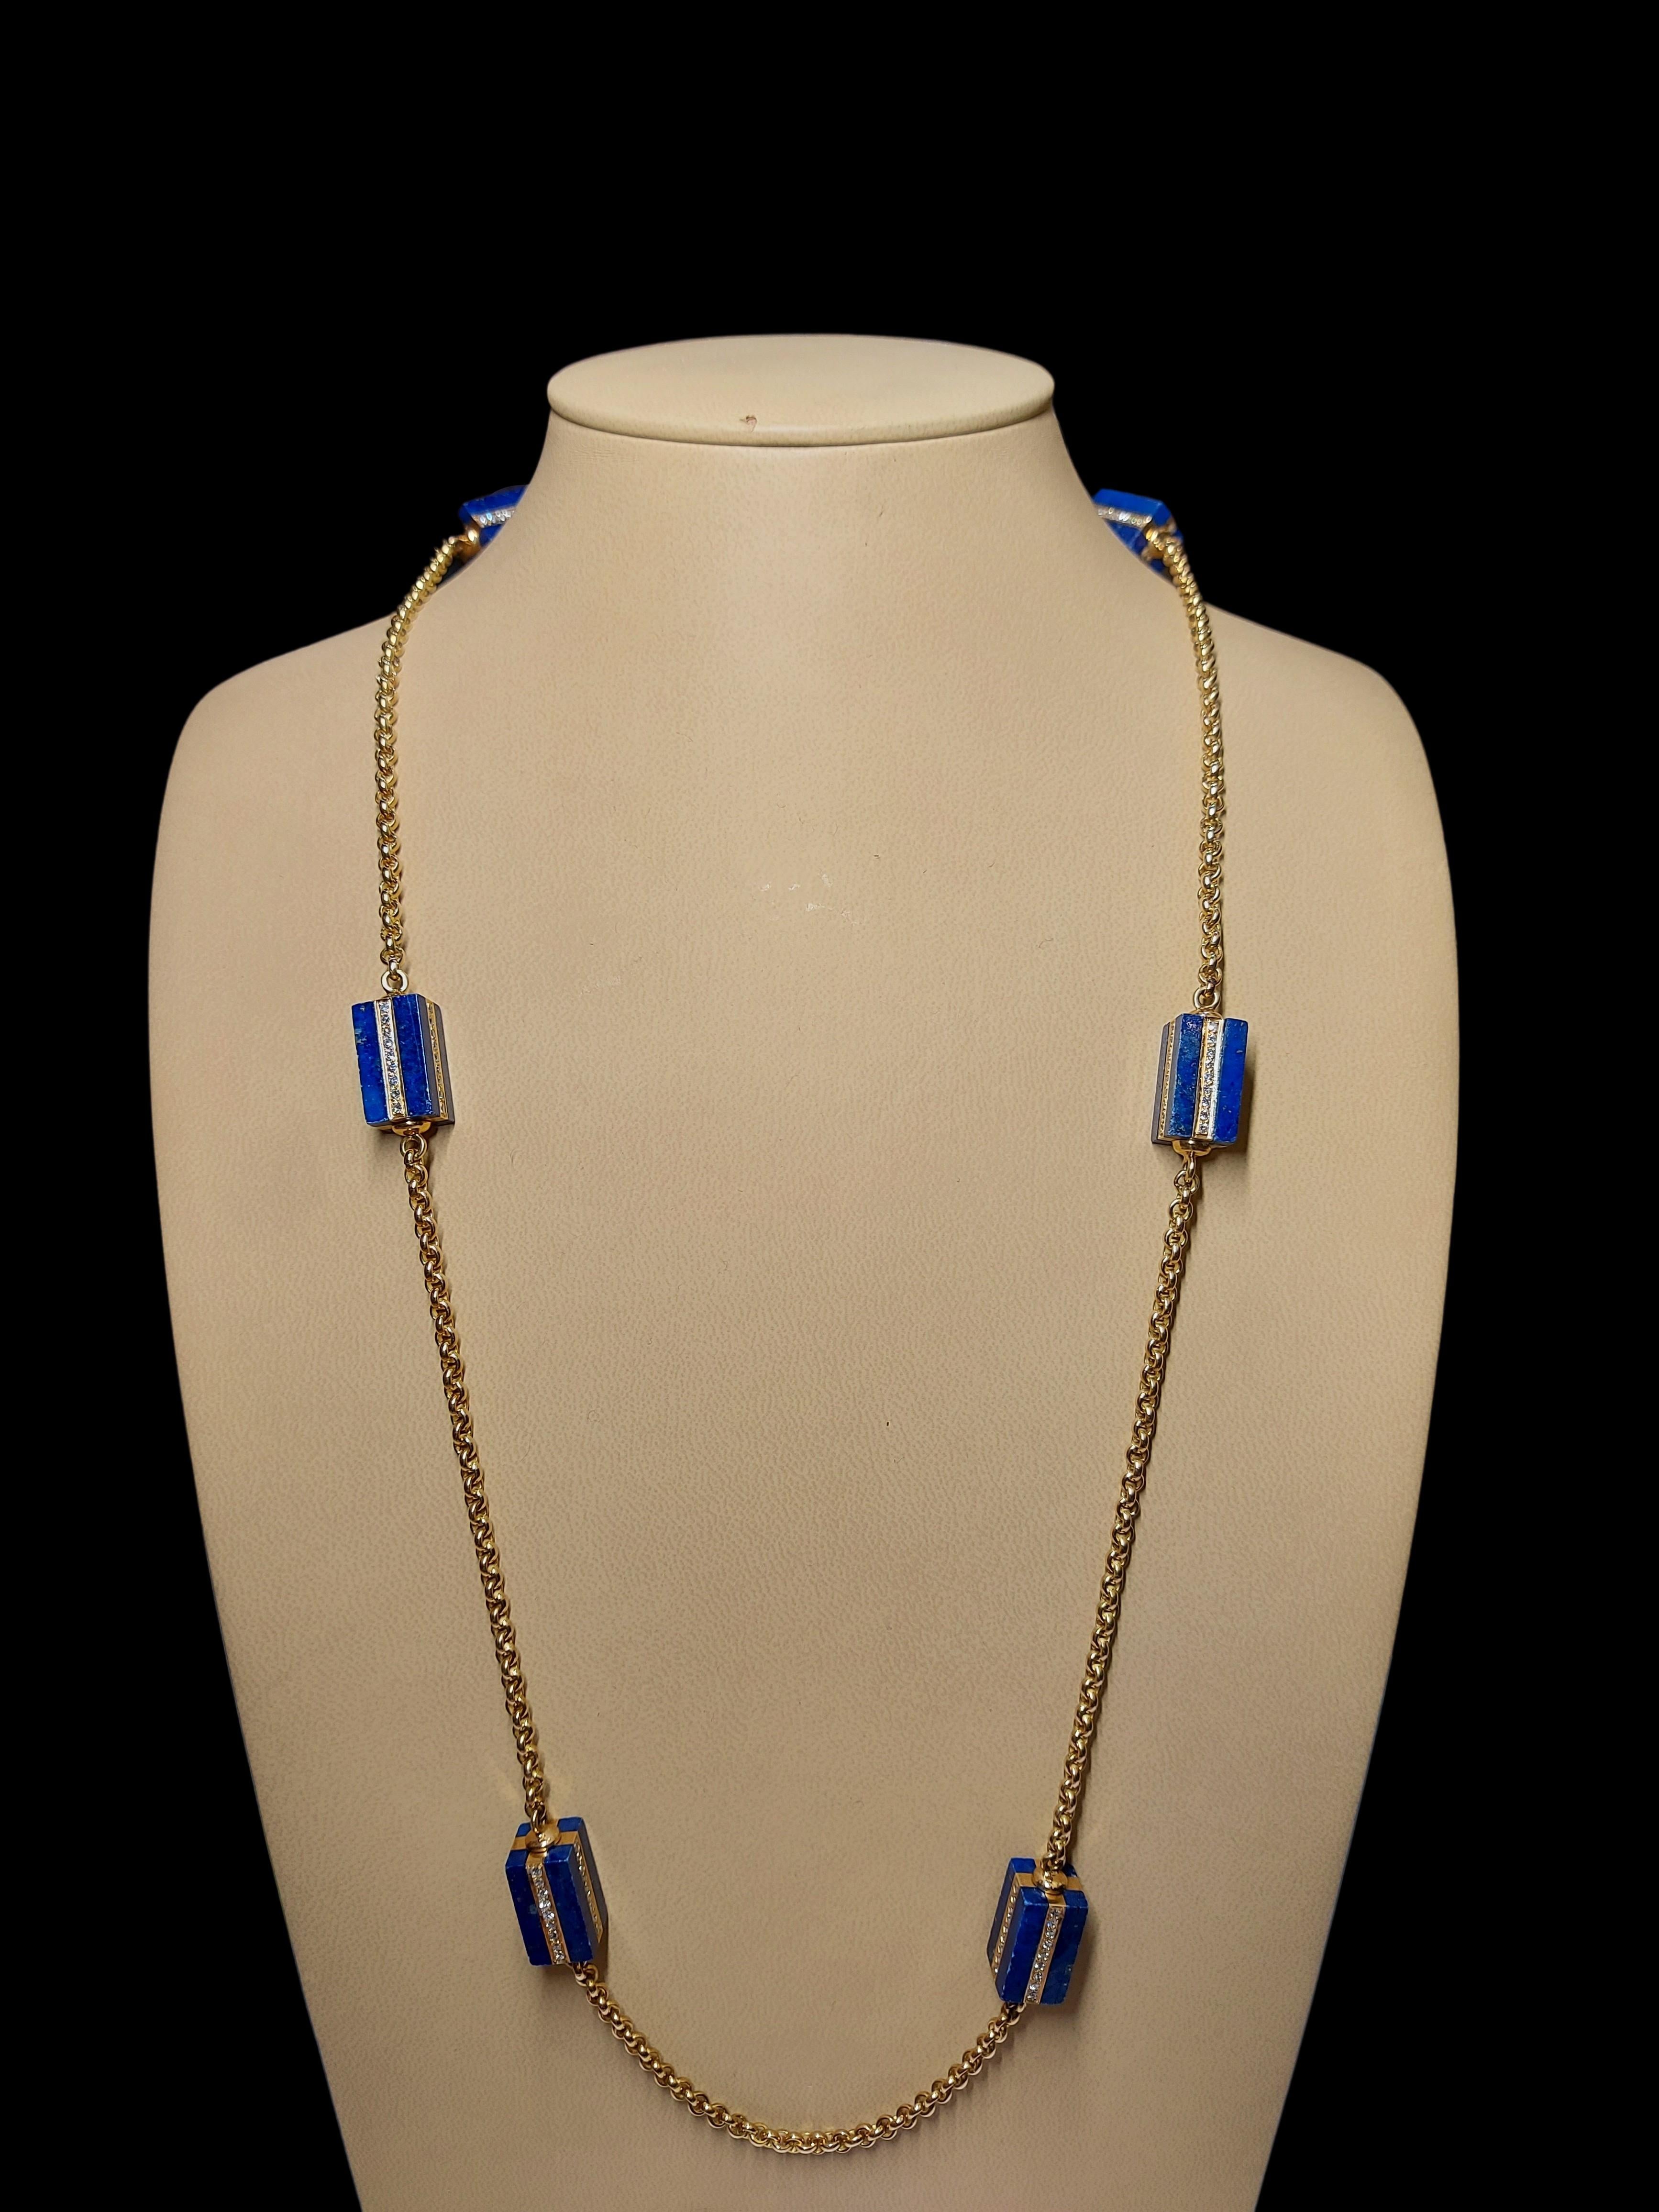 Artisan Long Necklace with Lapis Lazuli and 4.32 Ct Diamonds, Estate Sultan Oman Qaboos For Sale